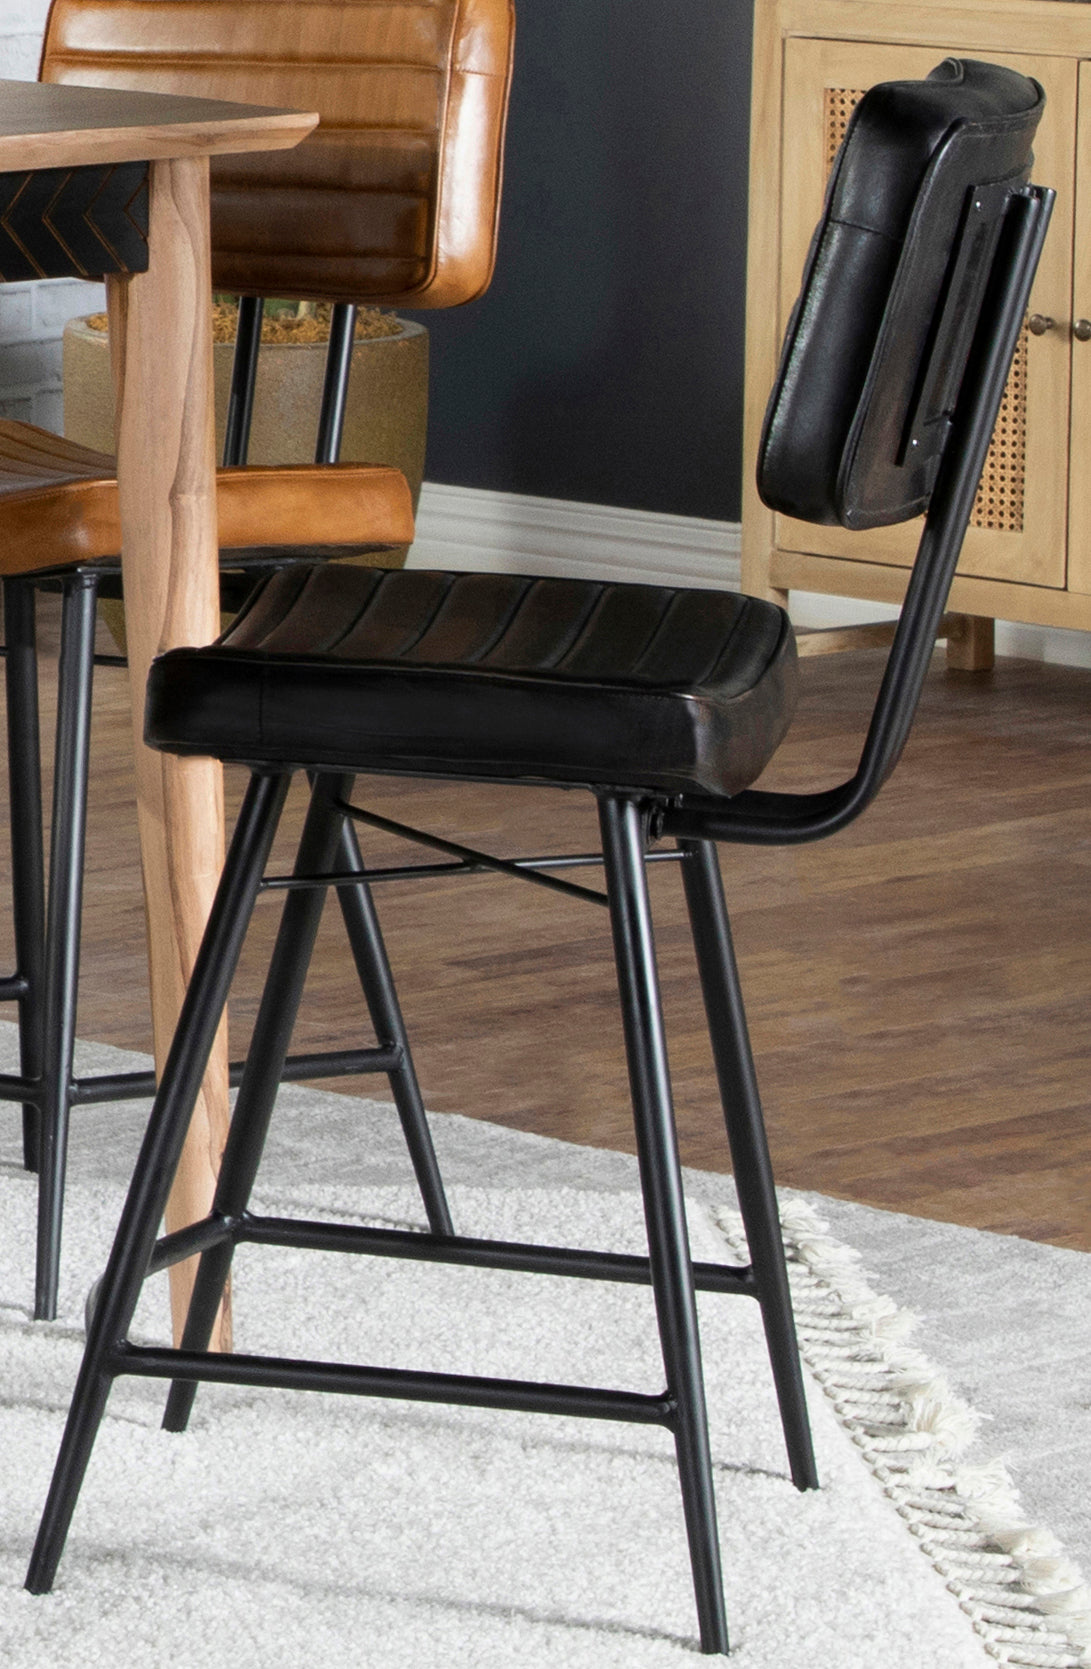 Partridge Upholstered Counter Height Stools with Footrest (Set of 2) - Half Price Furniture